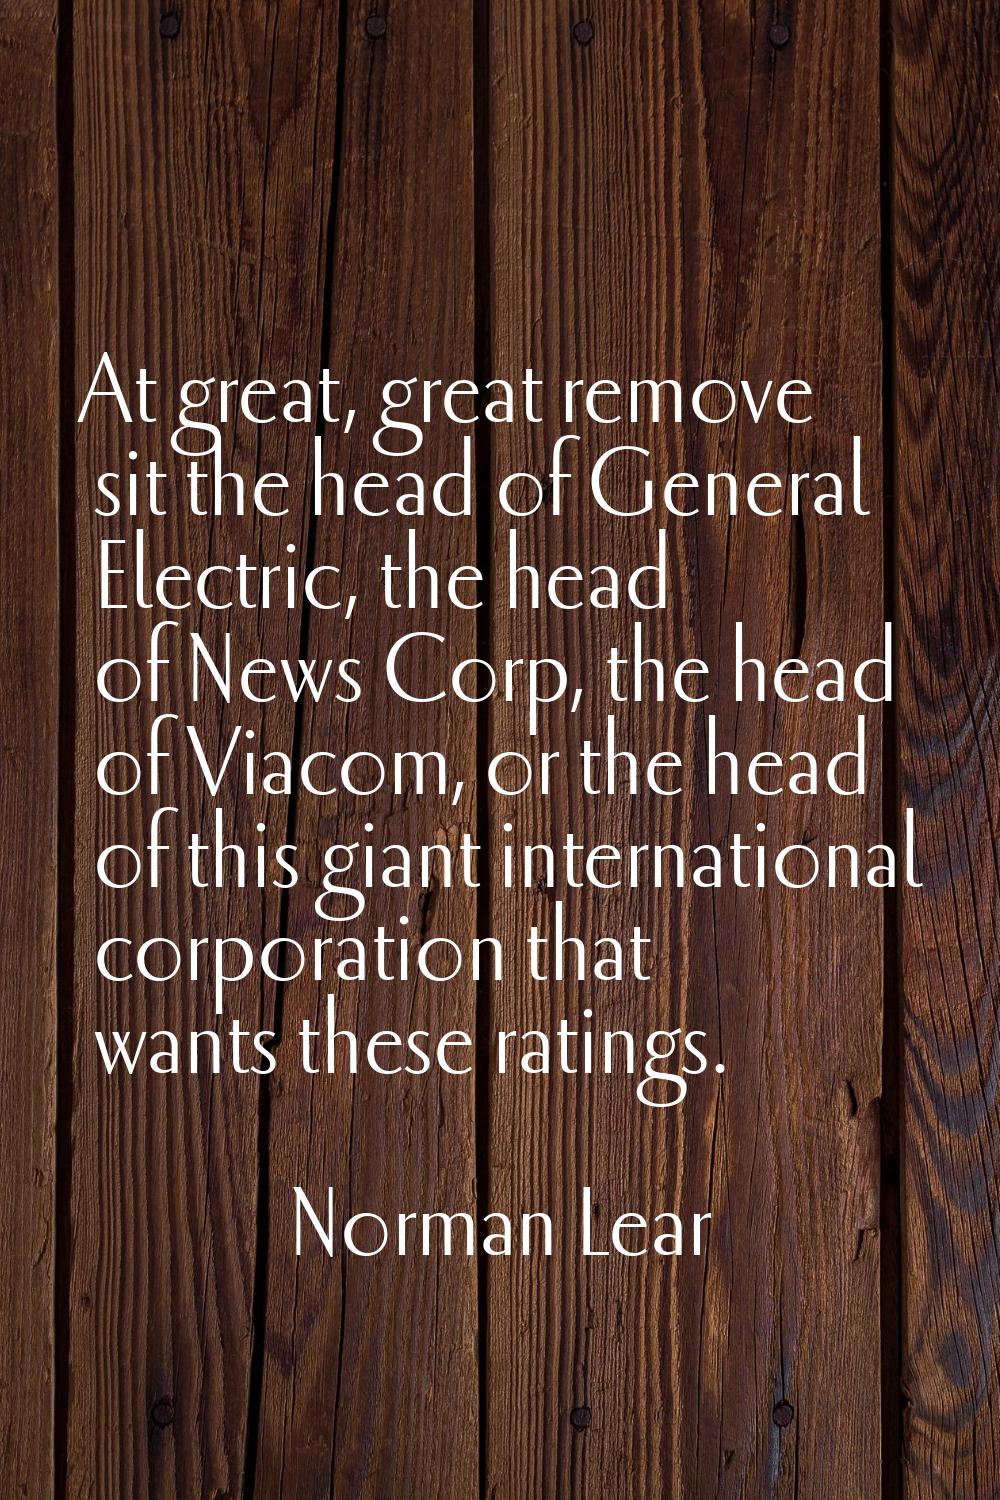 At great, great remove sit the head of General Electric, the head of News Corp, the head of Viacom,